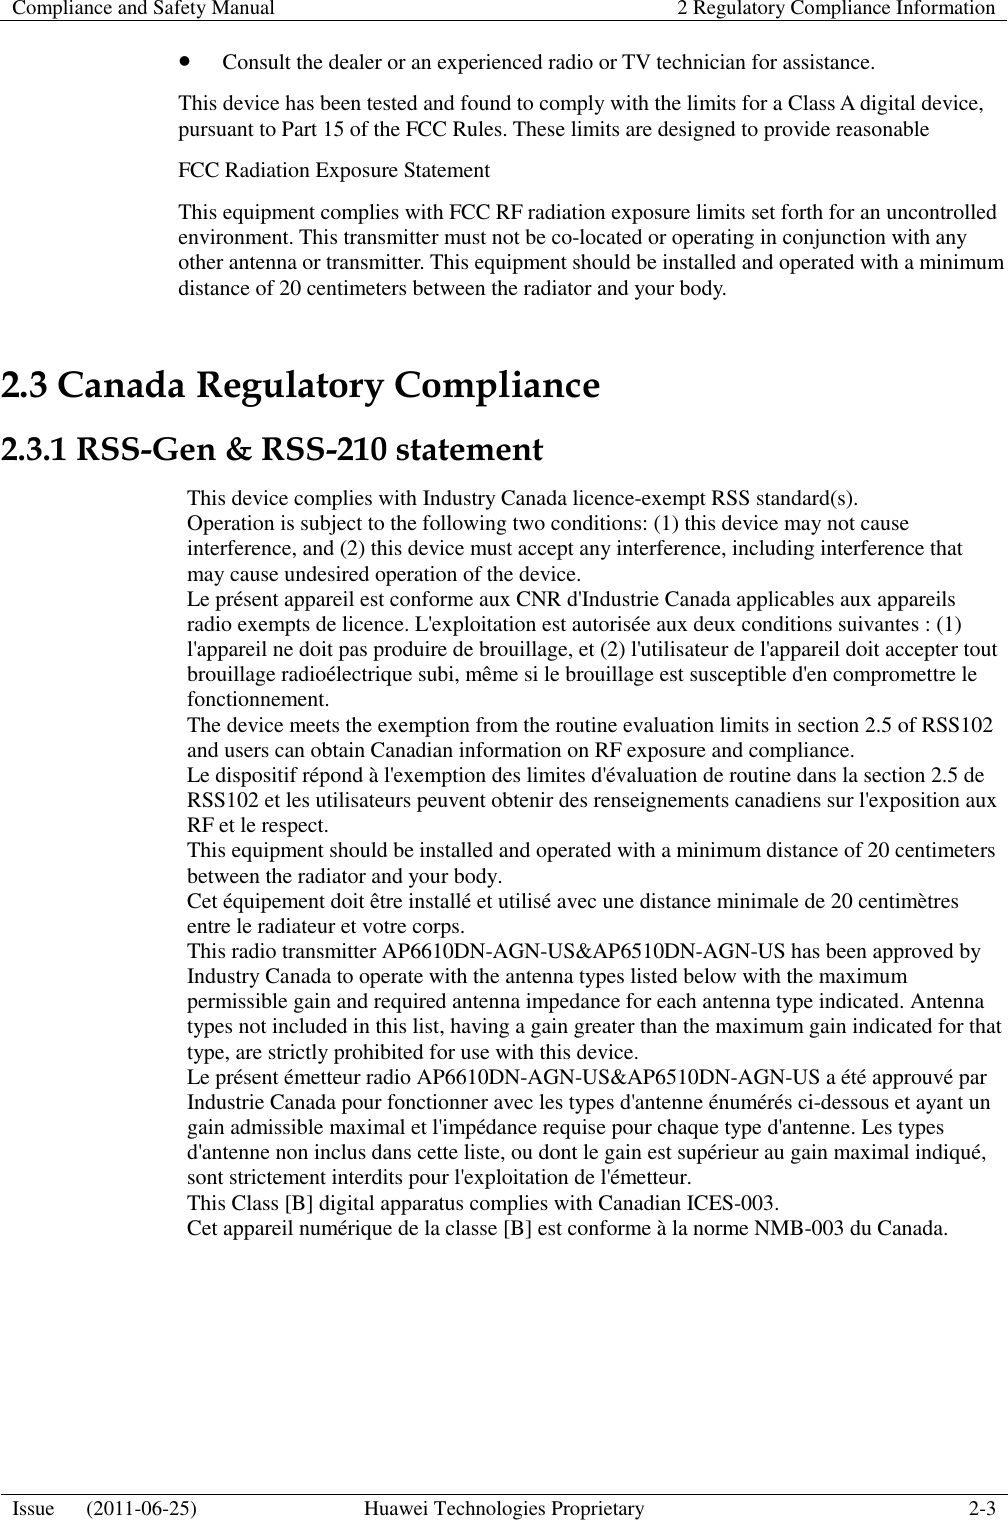 Compliance and Safety Manual 2 Regulatory Compliance Information  Issue      (2011-06-25) Huawei Technologies Proprietary 2-3   Consult the dealer or an experienced radio or TV technician for assistance. This device has been tested and found to comply with the limits for a Class A digital device, pursuant to Part 15 of the FCC Rules. These limits are designed to provide reasonable   FCC Radiation Exposure Statement   This equipment complies with FCC RF radiation exposure limits set forth for an uncontrolled environment. This transmitter must not be co-located or operating in conjunction with any other antenna or transmitter. This equipment should be installed and operated with a minimum distance of 20 centimeters between the radiator and your body. 2.3 Canada Regulatory Compliance 2.3.1 RSS-Gen &amp; RSS-210 statement This device complies with Industry Canada licence-exempt RSS standard(s). Operation is subject to the following two conditions: (1) this device may not cause interference, and (2) this device must accept any interference, including interference that may cause undesired operation of the device. Le présent appareil est conforme aux CNR d&apos;Industrie Canada applicables aux appareils radio exempts de licence. L&apos;exploitation est autorisée aux deux conditions suivantes : (1) l&apos;appareil ne doit pas produire de brouillage, et (2) l&apos;utilisateur de l&apos;appareil doit accepter tout brouillage radioélectrique subi, même si le brouillage est susceptible d&apos;en compromettre le fonctionnement.   The device meets the exemption from the routine evaluation limits in section 2.5 of RSS102 and users can obtain Canadian information on RF exposure and compliance.   Le dispositif répond à l&apos;exemption des limites d&apos;évaluation de routine dans la section 2.5 de RSS102 et les utilisateurs peuvent obtenir des renseignements canadiens sur l&apos;exposition aux RF et le respect.   This equipment should be installed and operated with a minimum distance of 20 centimeters between the radiator and your body.   Cet équipement doit être installé et utilisé avec une distance minimale de 20 centimètres entre le radiateur et votre corps. This radio transmitter AP6610DN-AGN-US&amp;AP6510DN-AGN-US has been approved by Industry Canada to operate with the antenna types listed below with the maximum permissible gain and required antenna impedance for each antenna type indicated. Antenna types not included in this list, having a gain greater than the maximum gain indicated for that type, are strictly prohibited for use with this device.   Le présent émetteur radio AP6610DN-AGN-US&amp;AP6510DN-AGN-US a été approuvé par Industrie Canada pour fonctionner avec les types d&apos;antenne énumérés ci-dessous et ayant un gain admissible maximal et l&apos;impédance requise pour chaque type d&apos;antenne. Les types d&apos;antenne non inclus dans cette liste, ou dont le gain est supérieur au gain maximal indiqué, sont strictement interdits pour l&apos;exploitation de l&apos;émetteur. This Class [B] digital apparatus complies with Canadian ICES-003.   Cet appareil numérique de la classe [B] est conforme à la norme NMB-003 du Canada. 